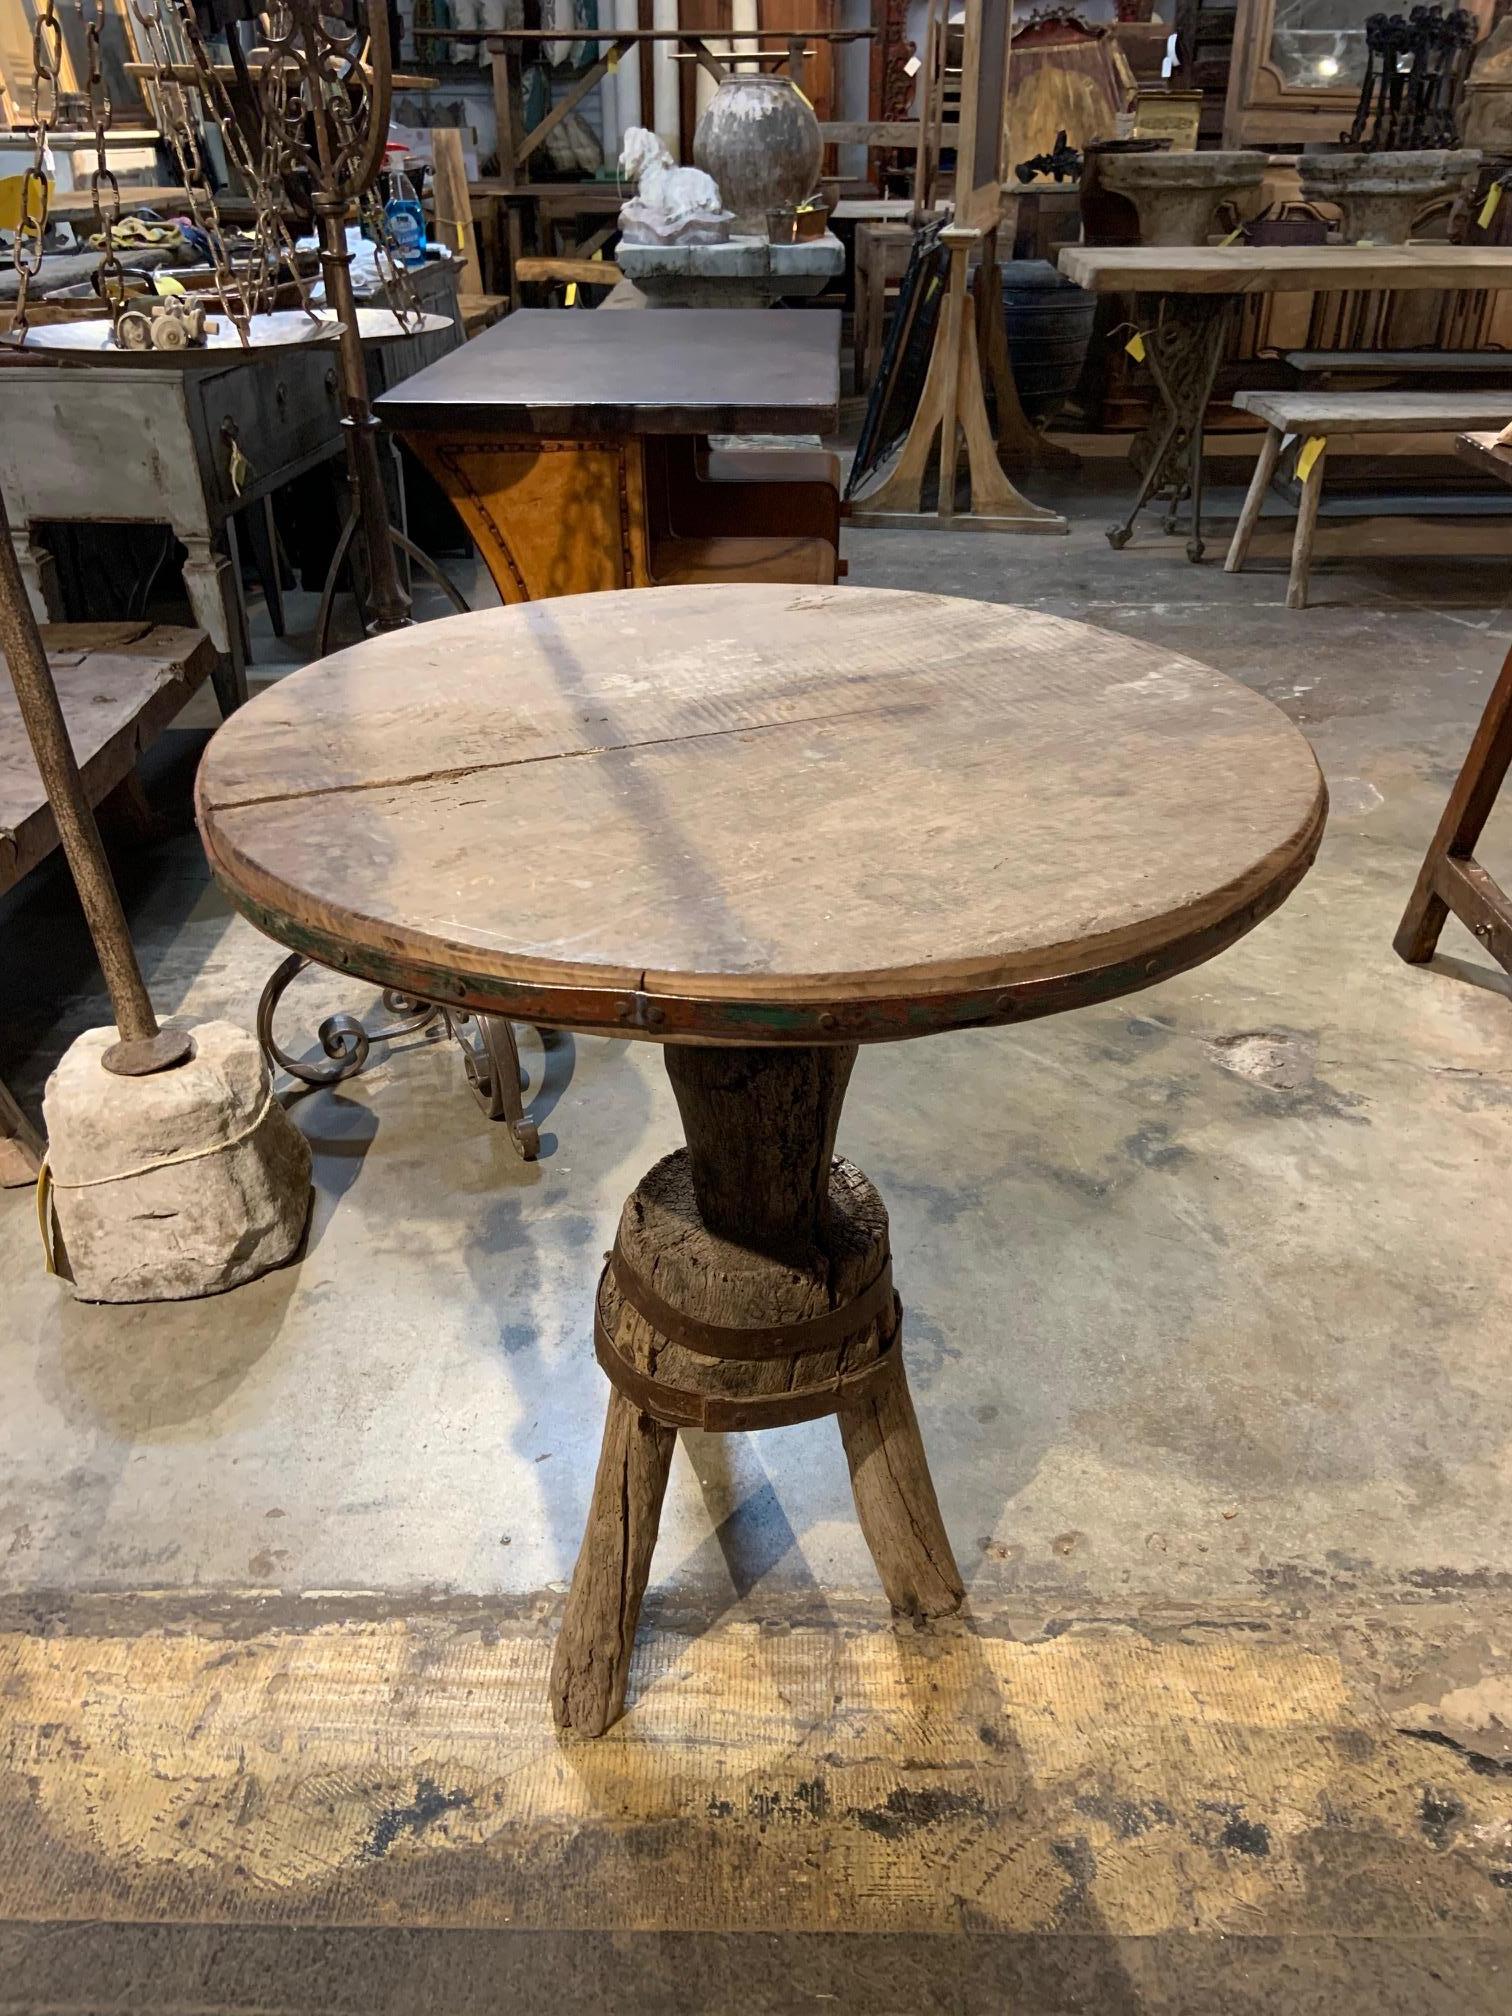 A very attractive late 18th century primitive gueridon from the Catalan region of Spain. Wonderful patina. A terrific side table for any rustic environment.